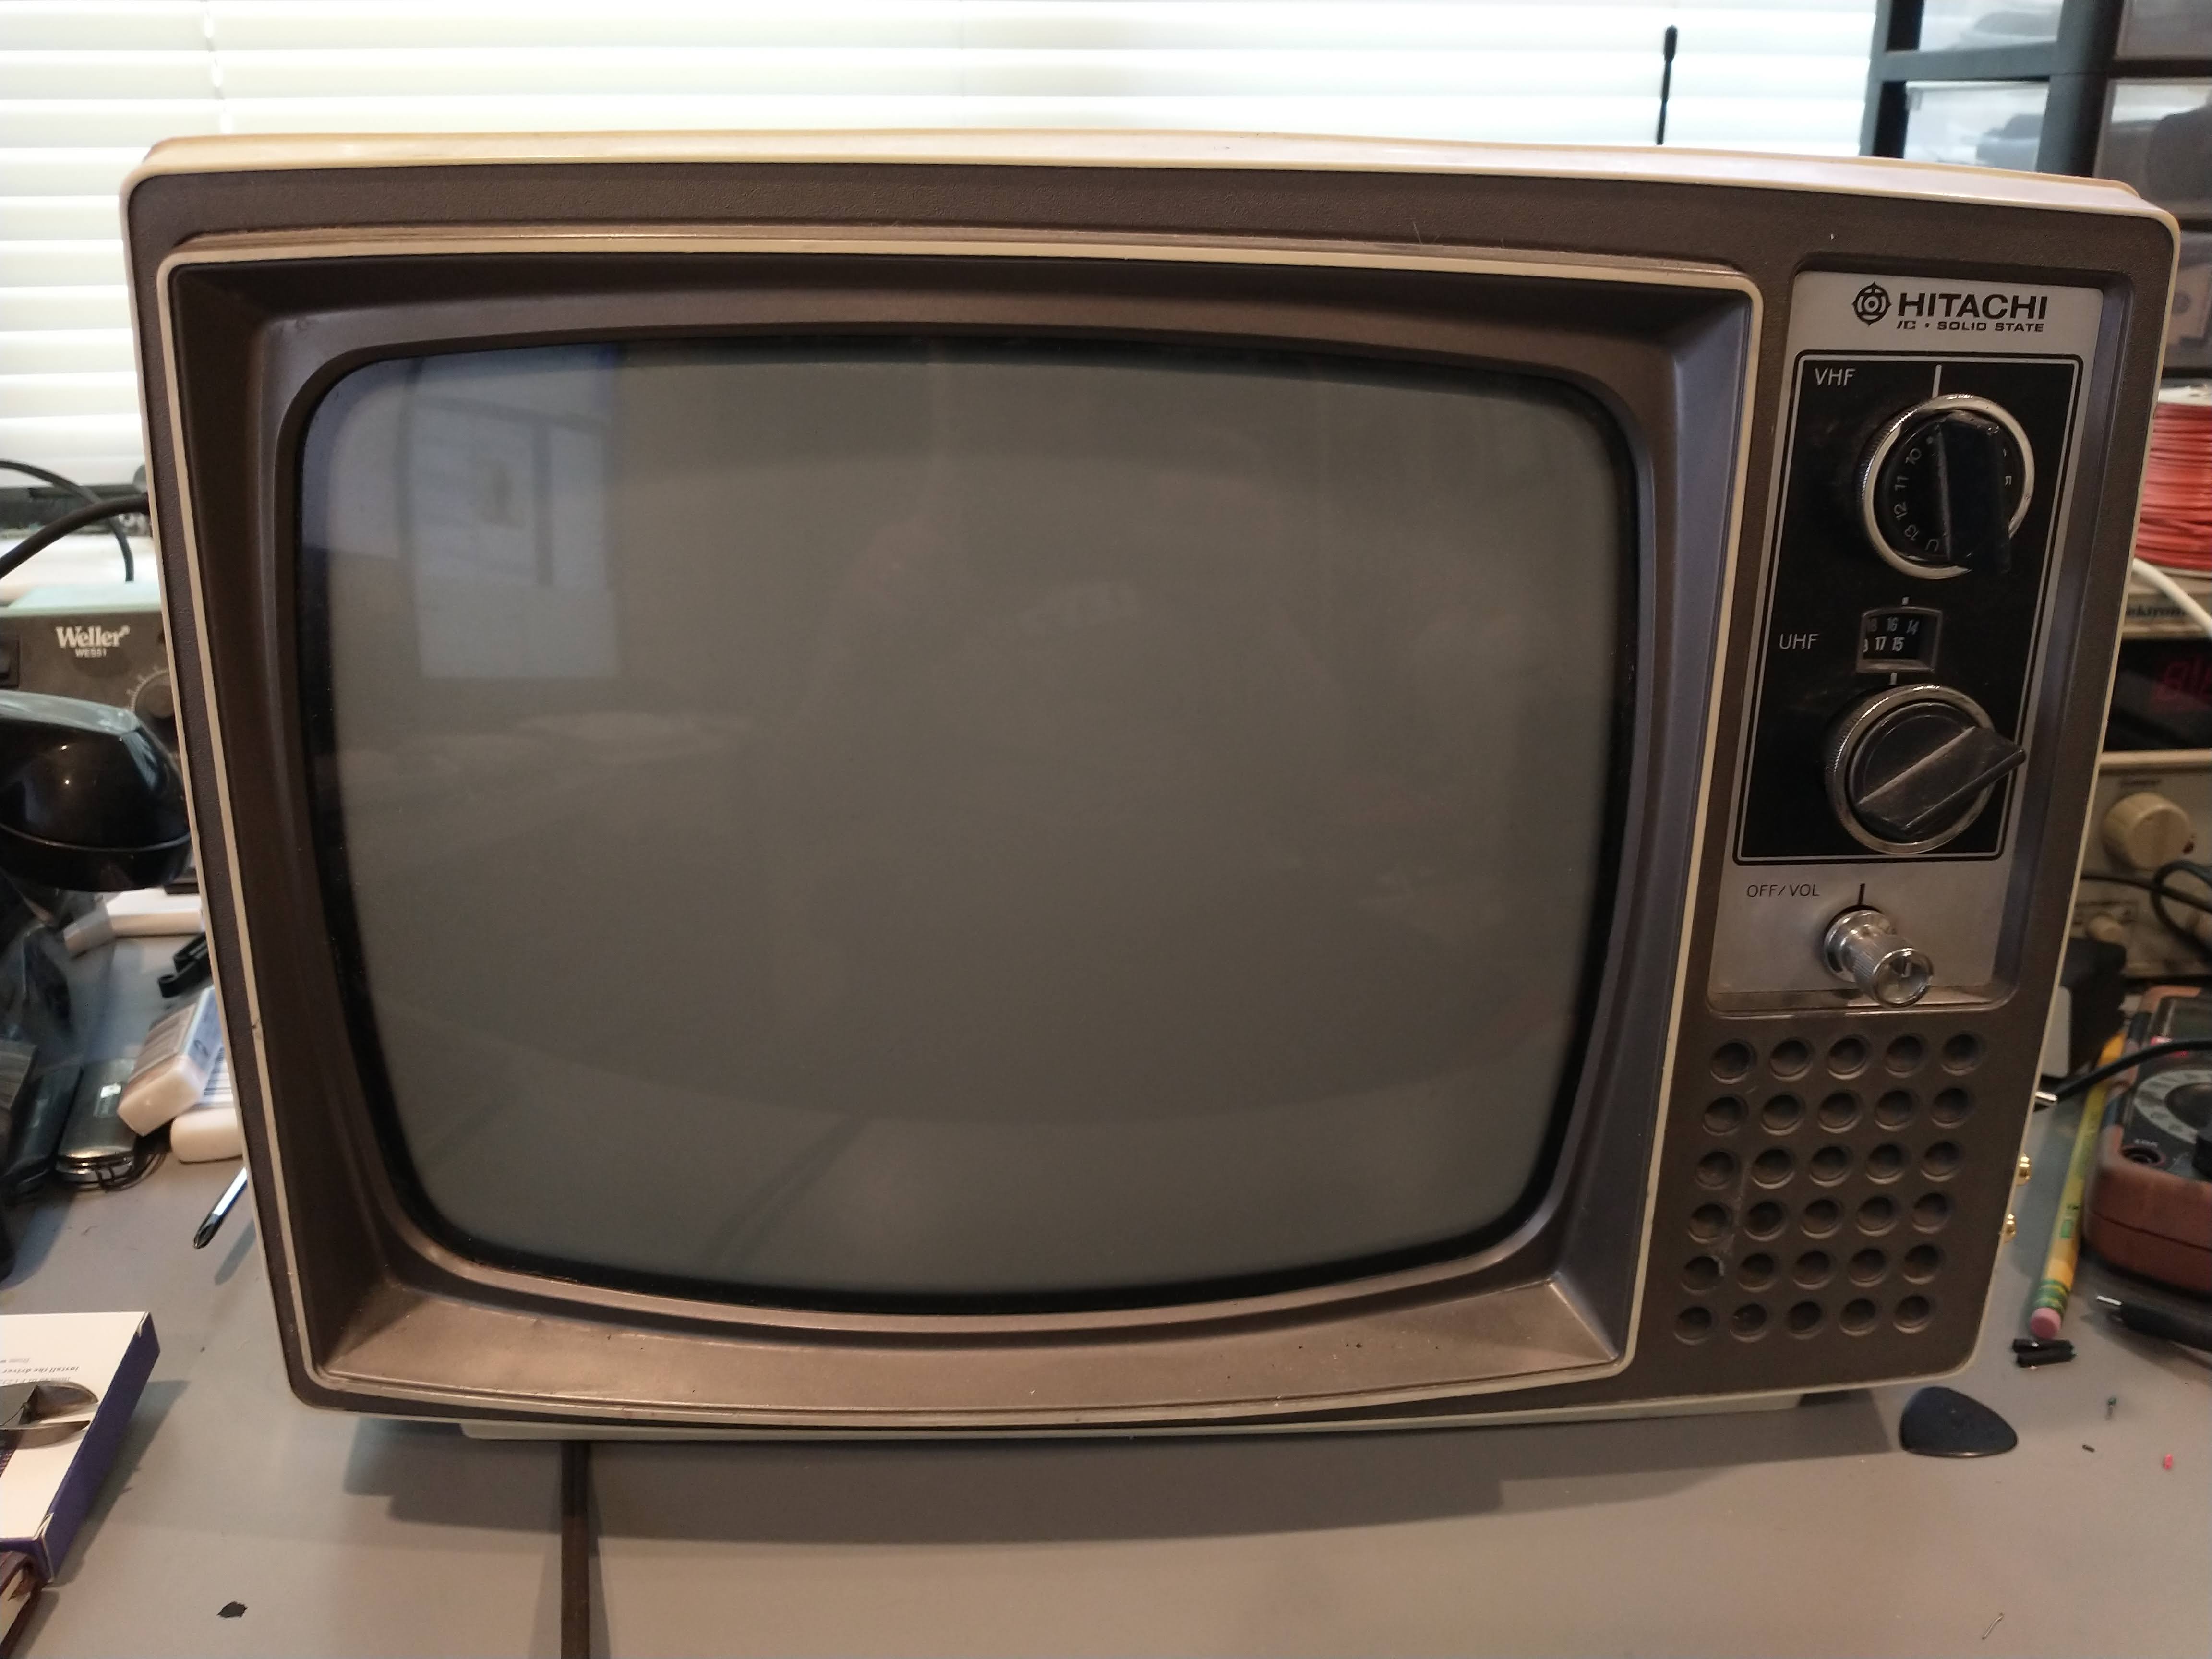 front view of tv